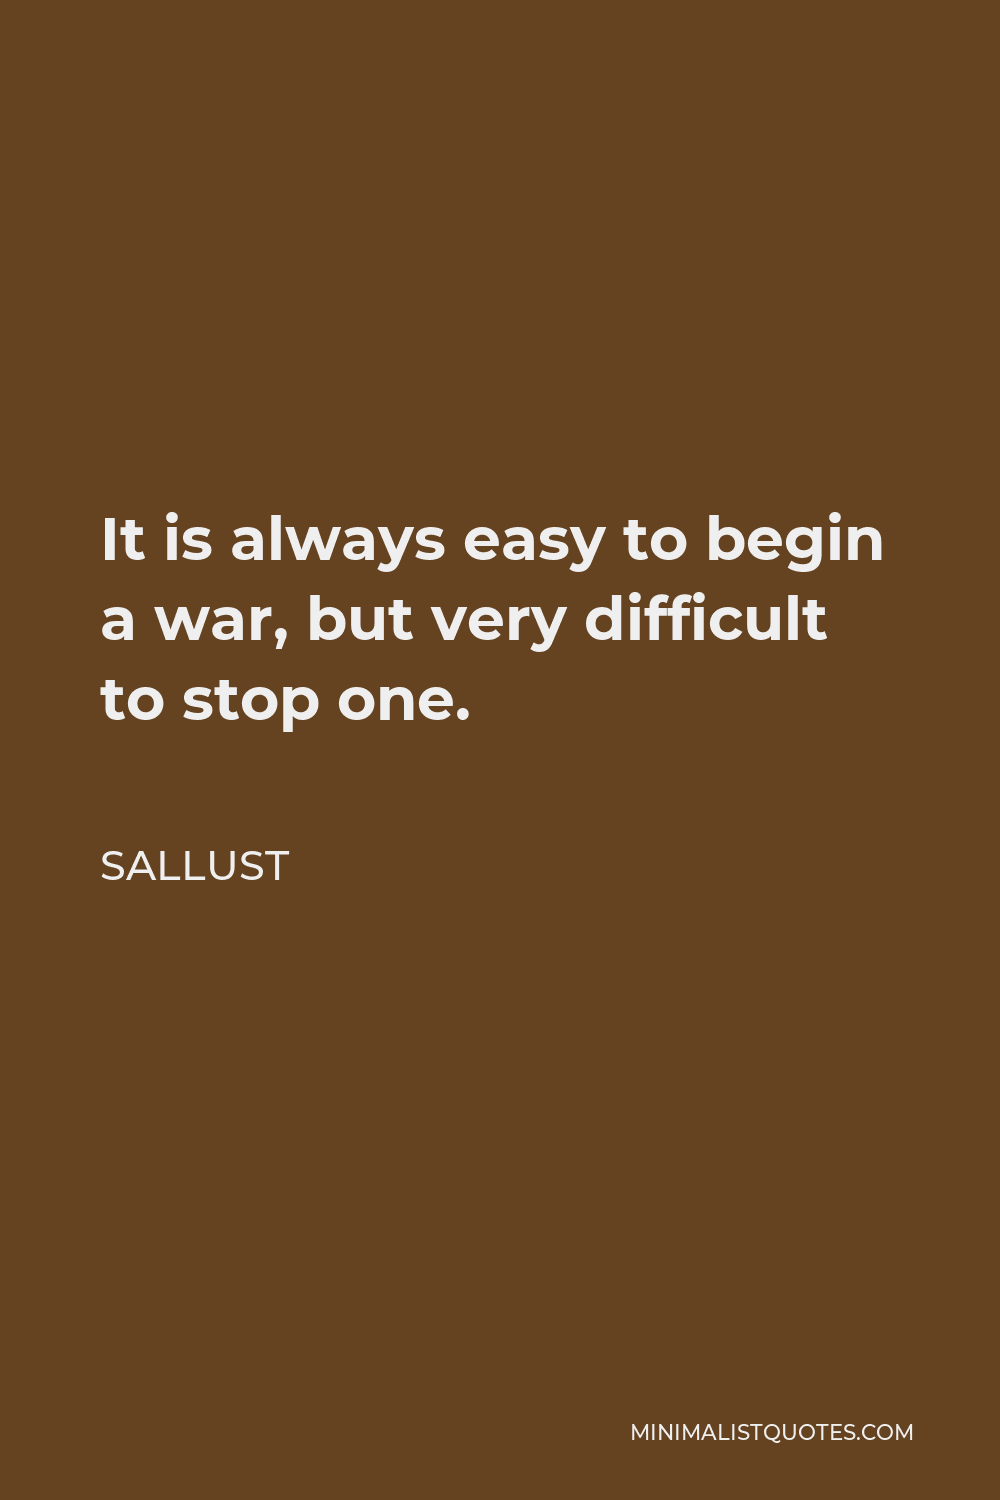 Sallust Quote - It is always easy to begin a war, but very difficult to stop one.